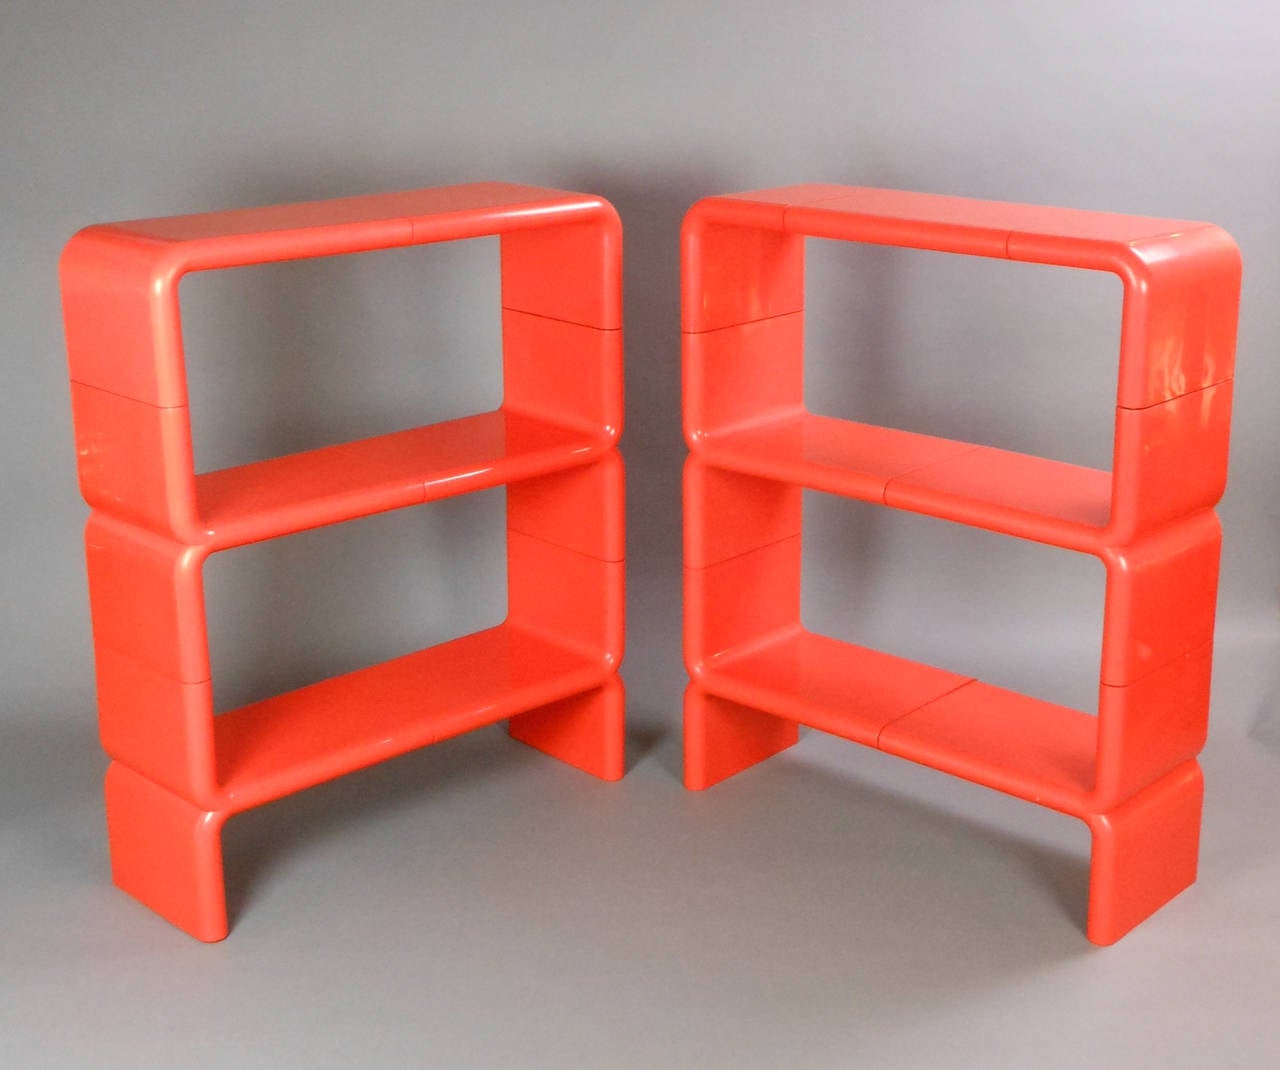 Pair of shelves by Kay Leroy Ruggles for Directional. Currently assembled as two-shelf units but can be configured in multiple ways.